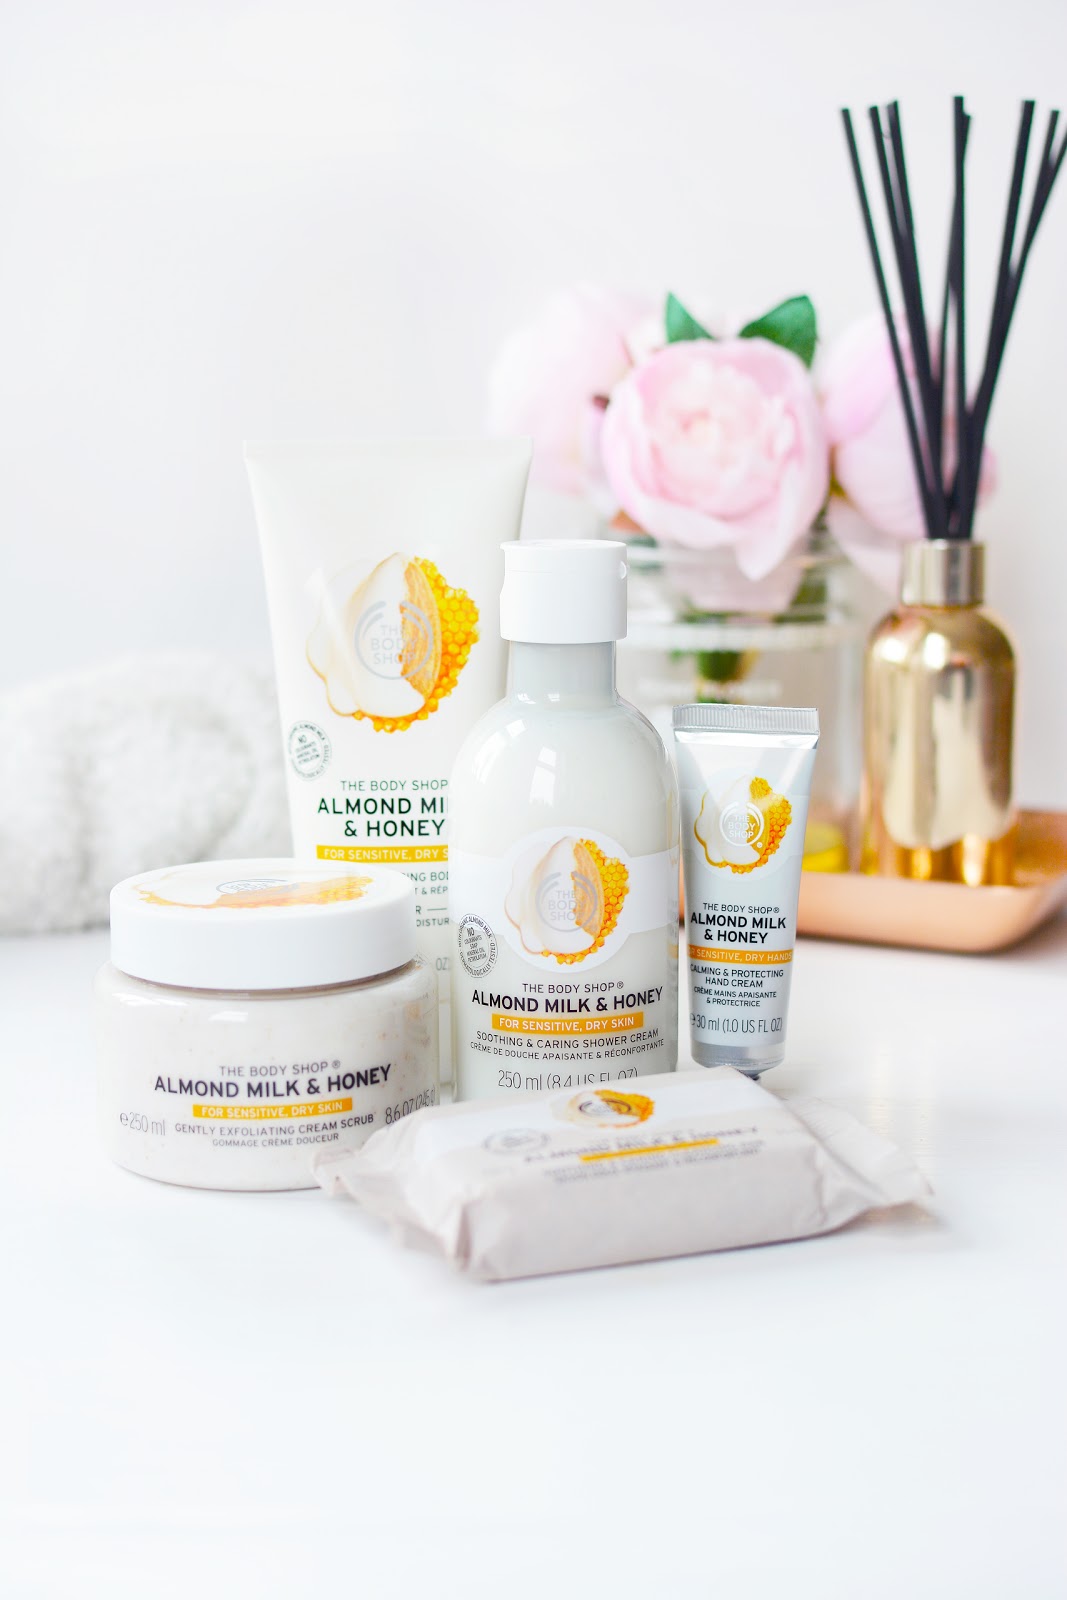 The Body Shop Almond Milk & Honey Collection For Dry, Sensitive Skin